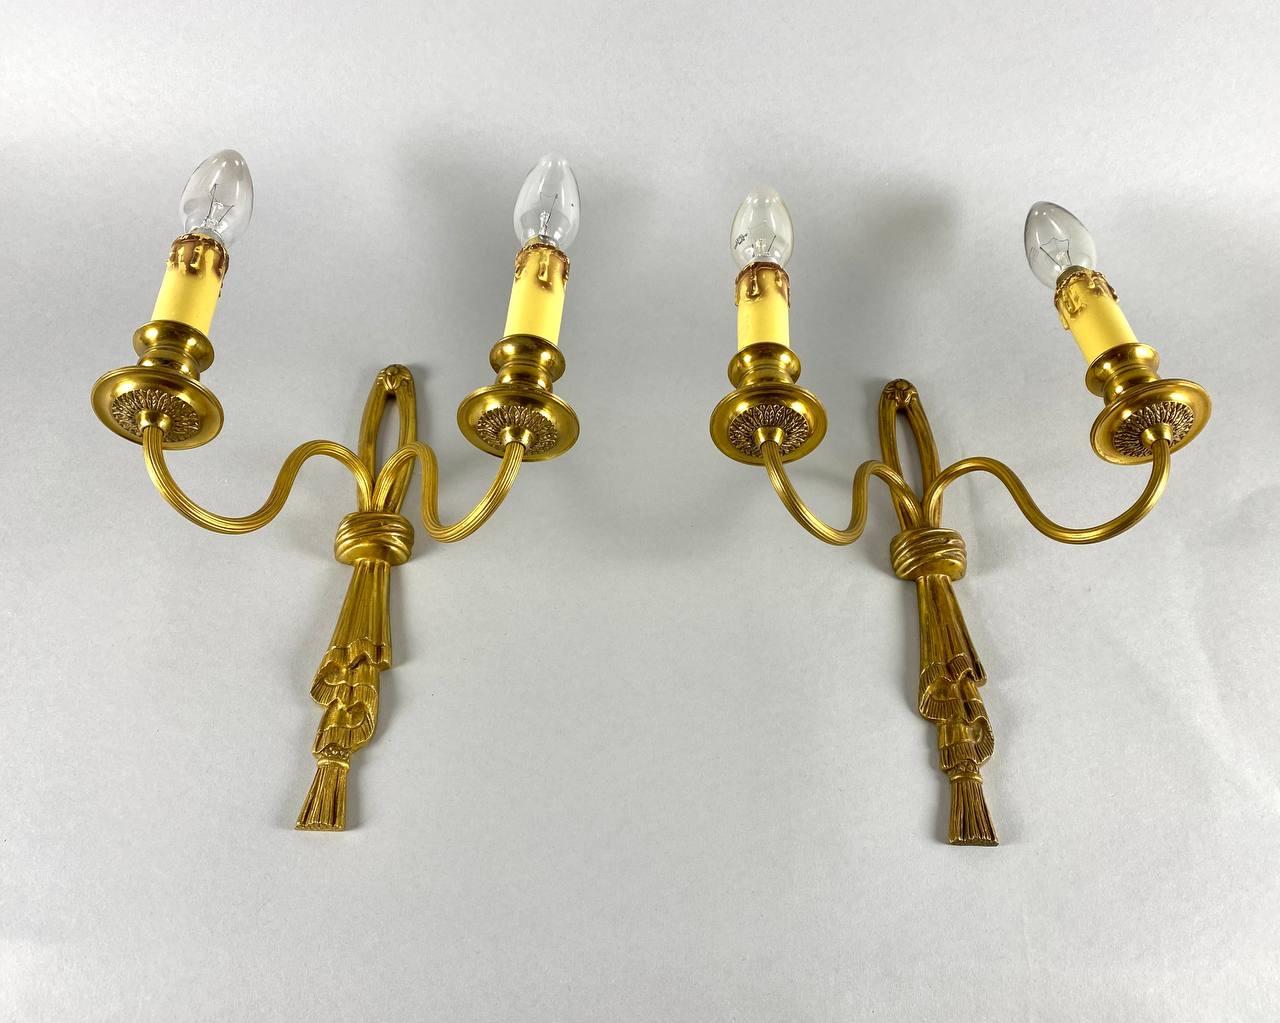 Exquisite Vintage Bronze Wall Sconces with Candles, Set of 2 In Excellent Condition For Sale In Bastogne, BE